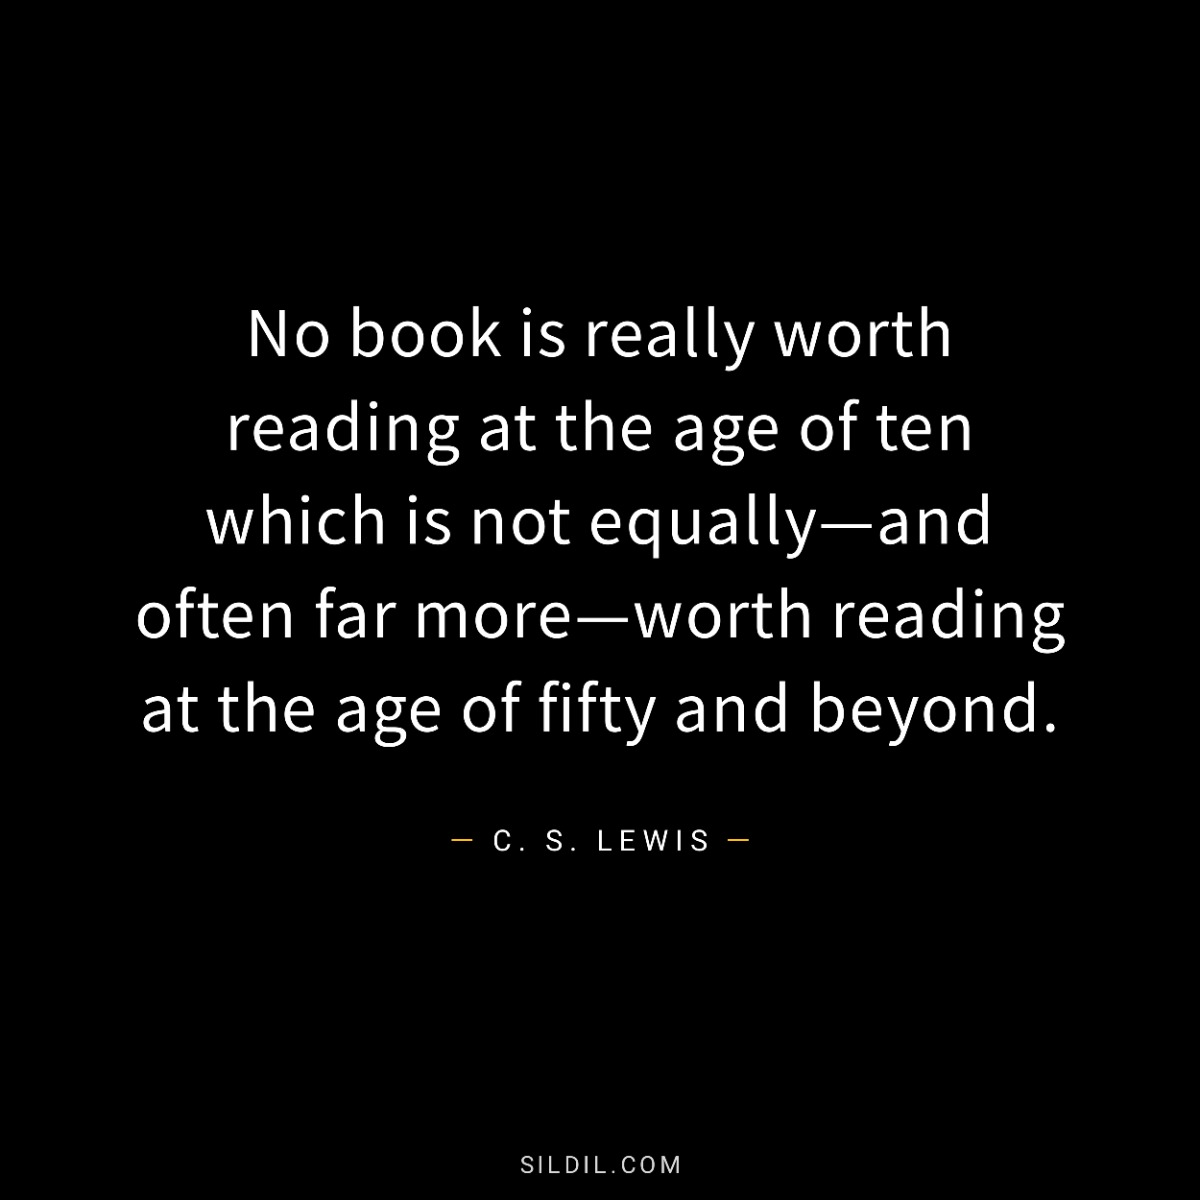 No book is really worth reading at the age of ten which is not equally—and often far more—worth reading at the age of fifty and beyond.